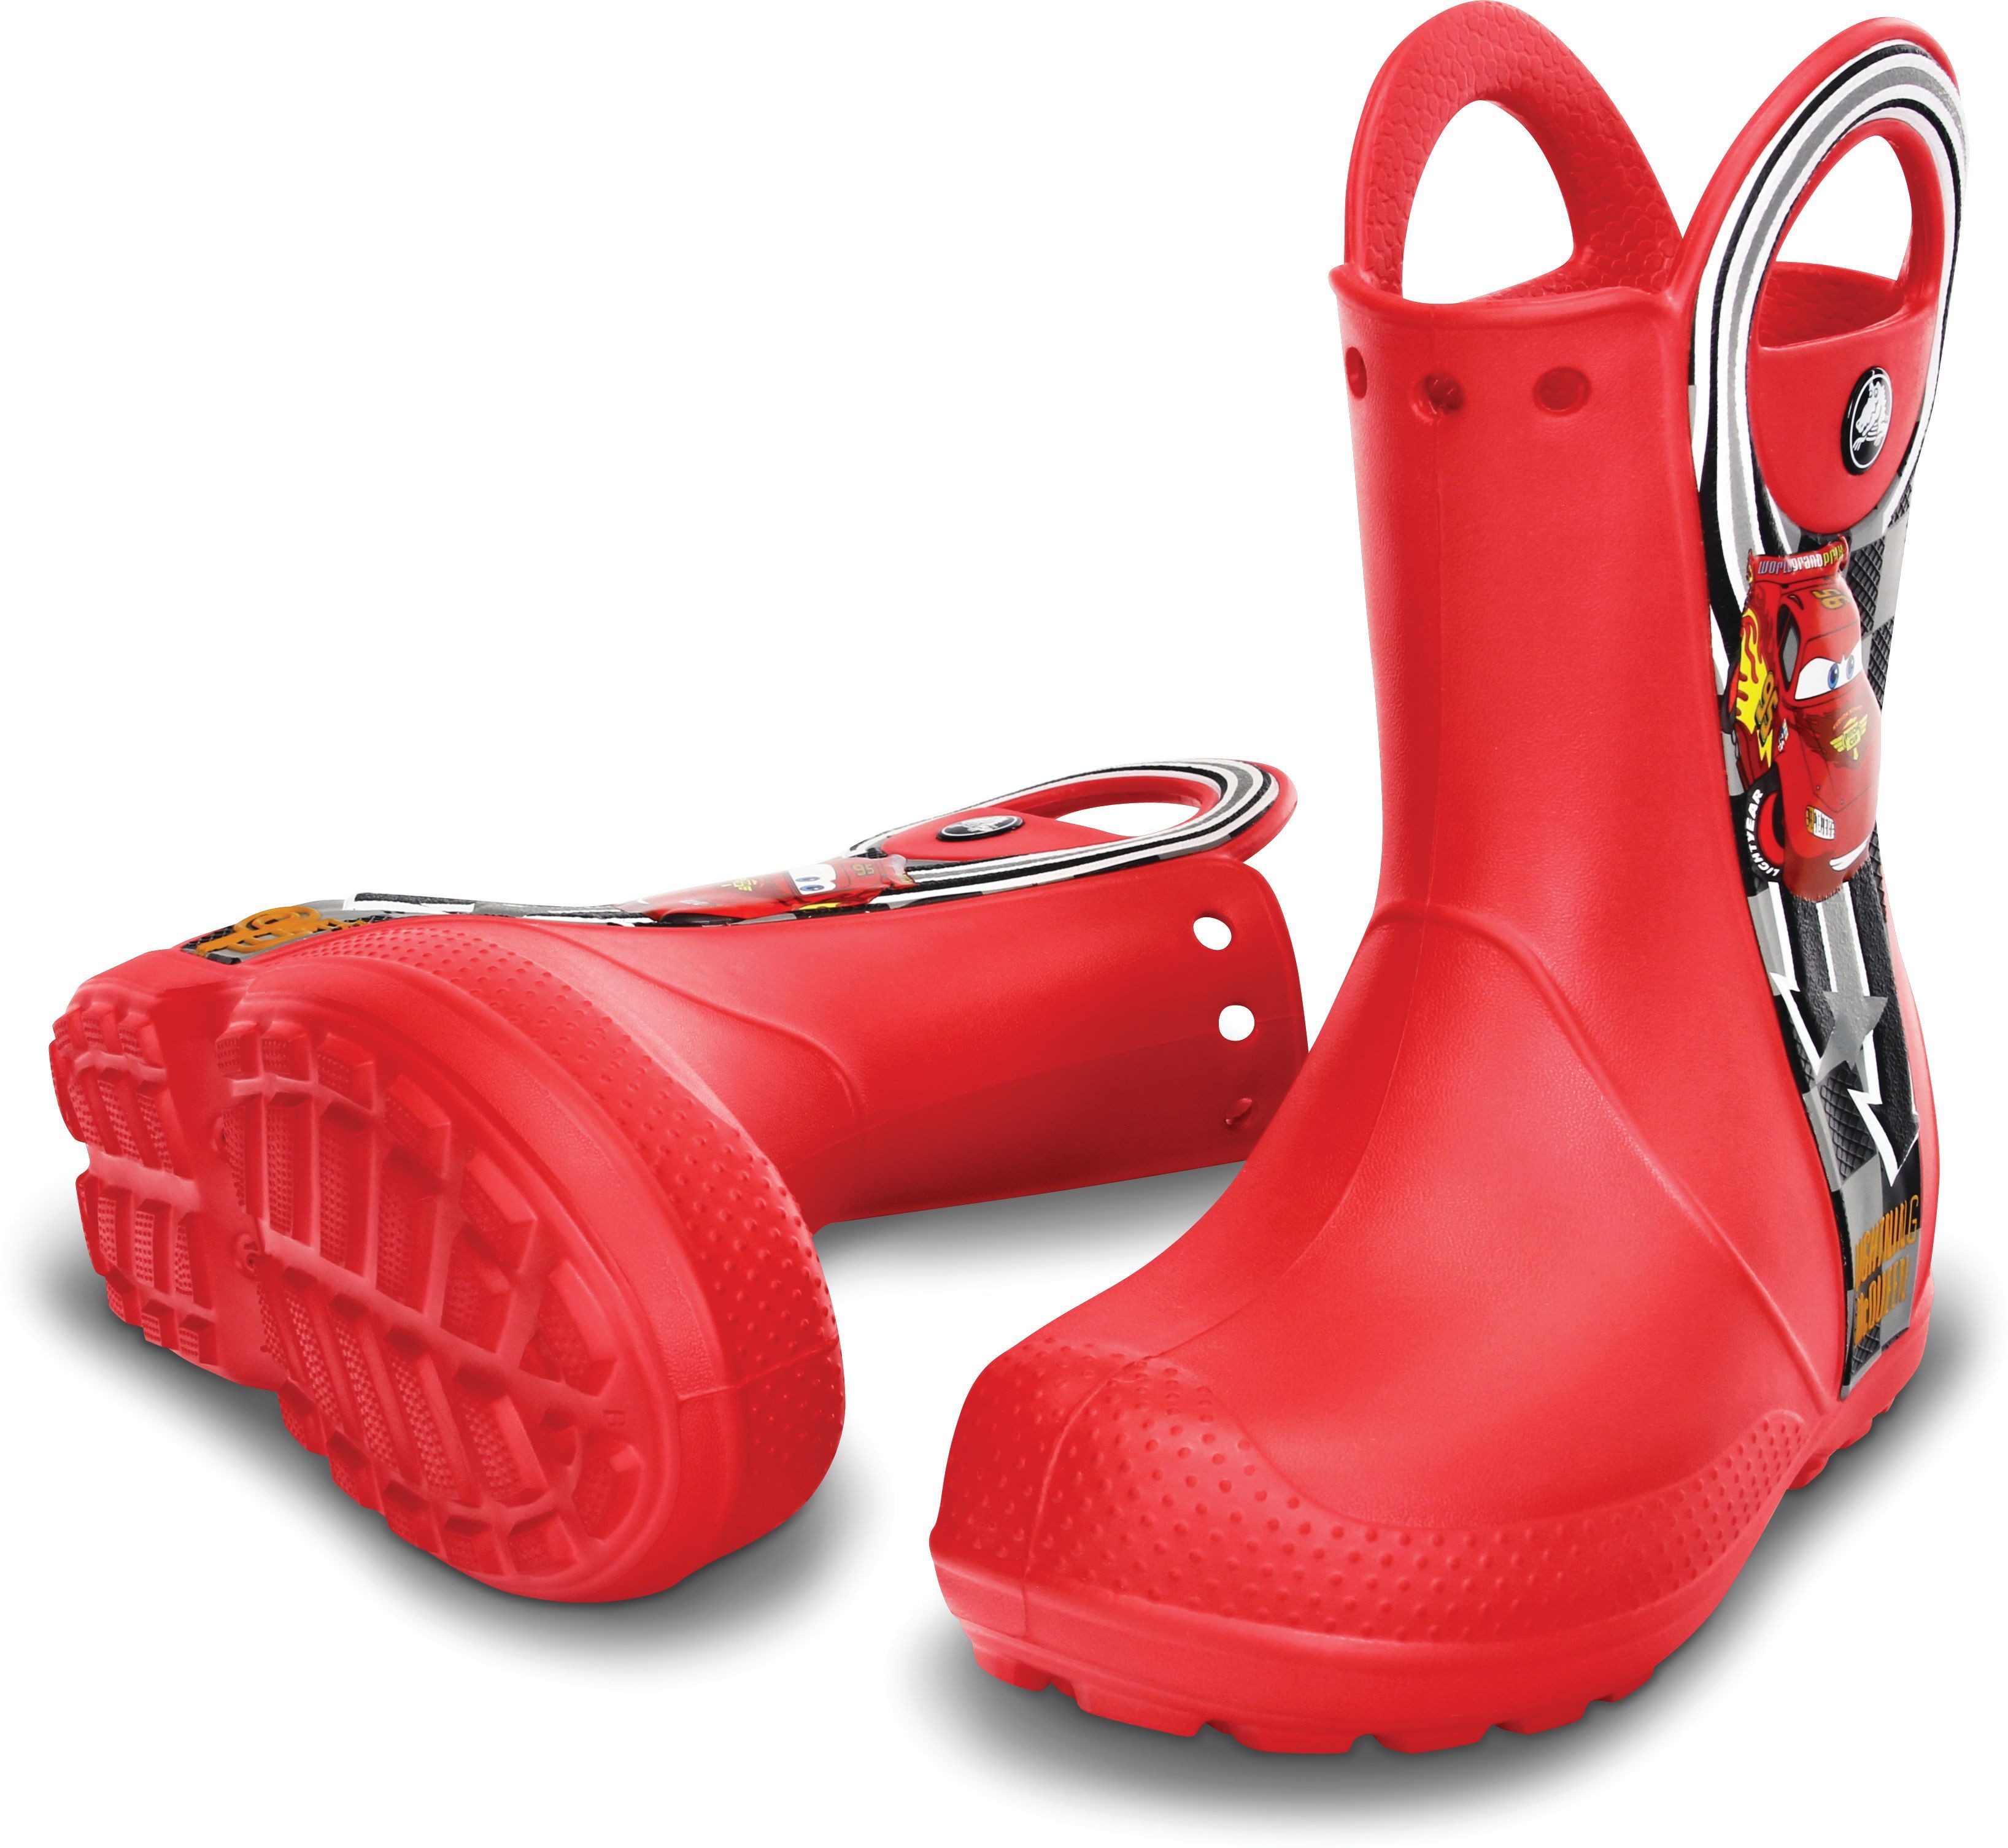 Crocs Loafers(Red)